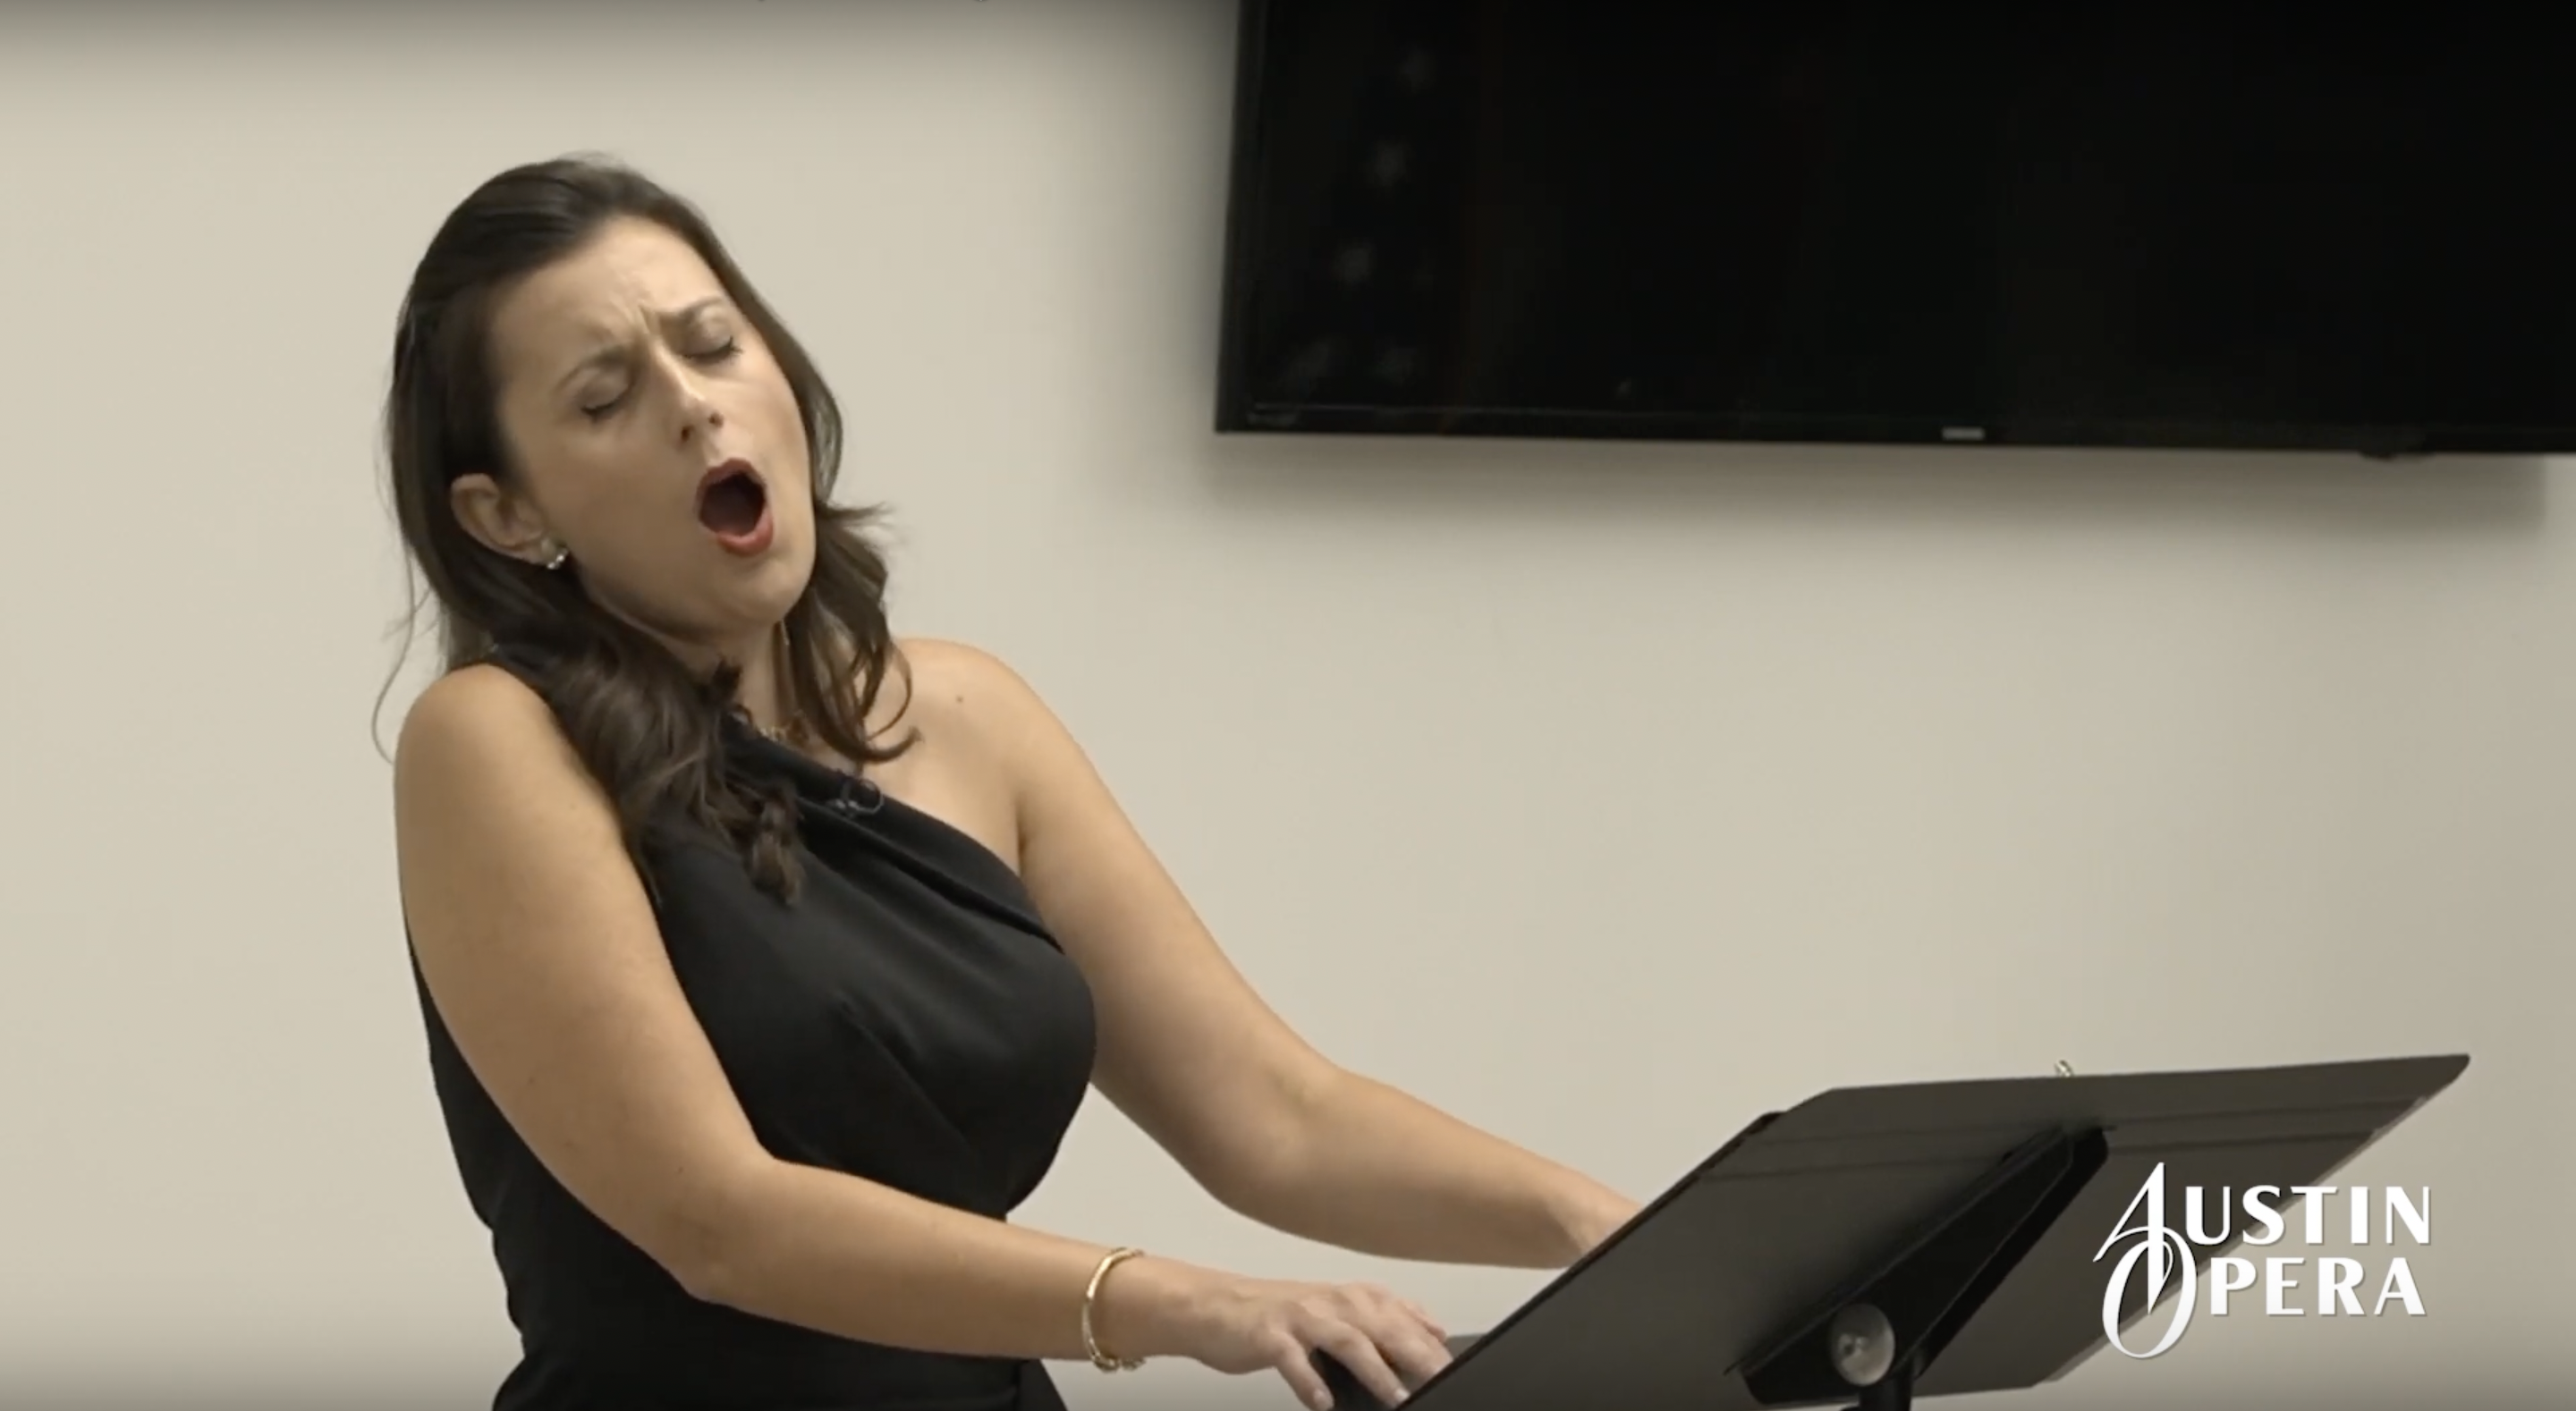 Soprano Megan Pachecano sings with Austin Opera for their Concerts at the Consulate series.